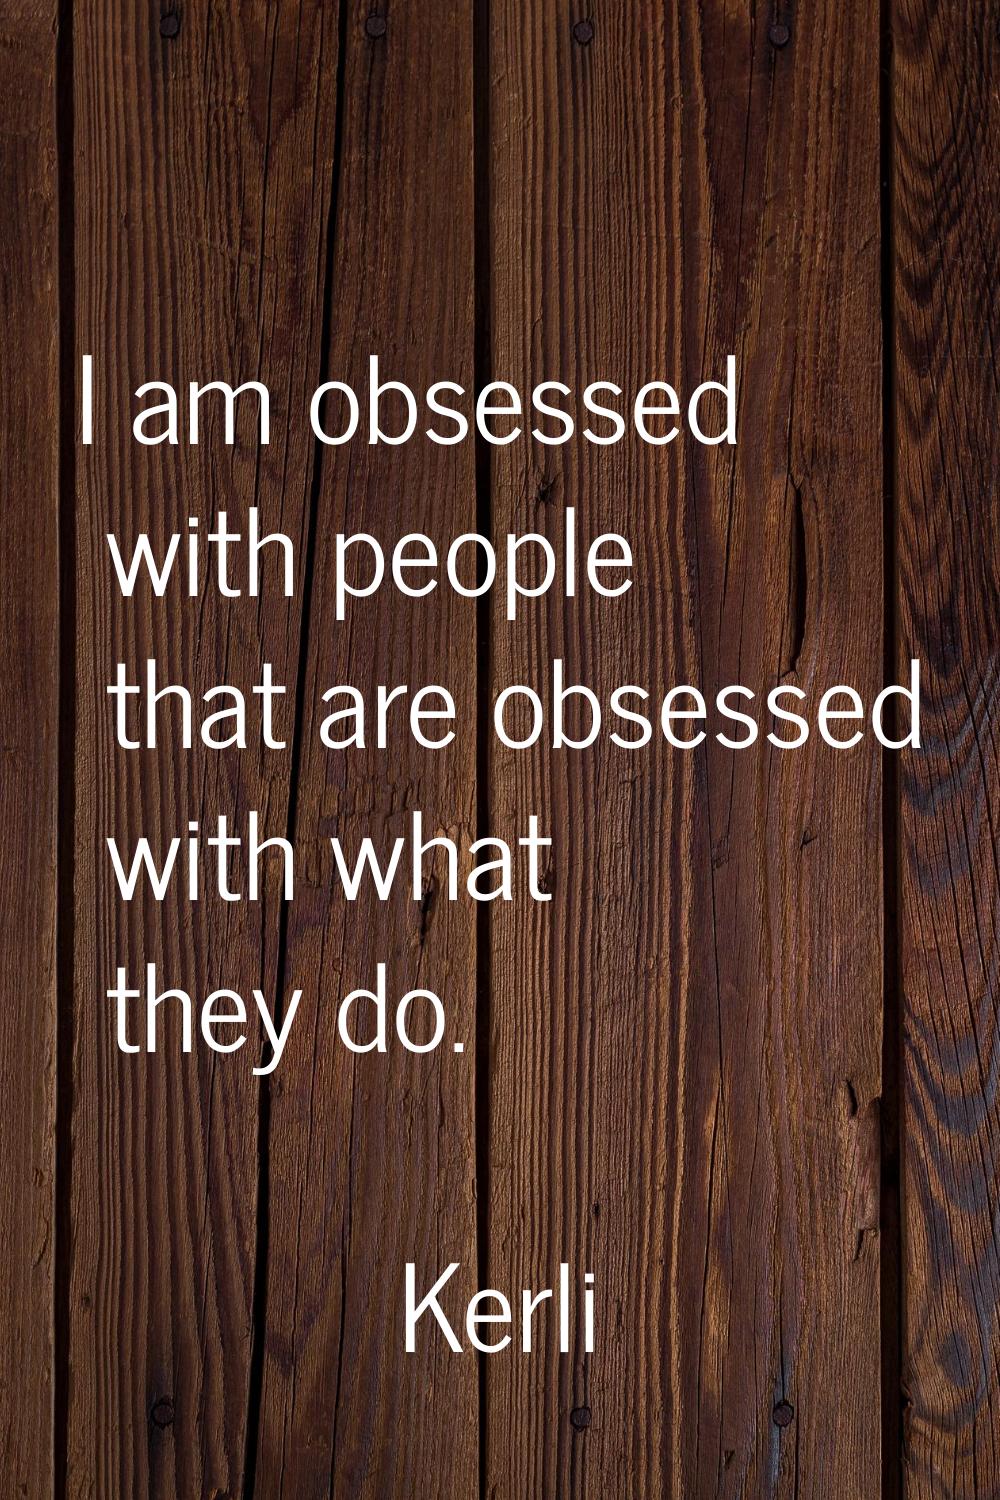 I am obsessed with people that are obsessed with what they do.